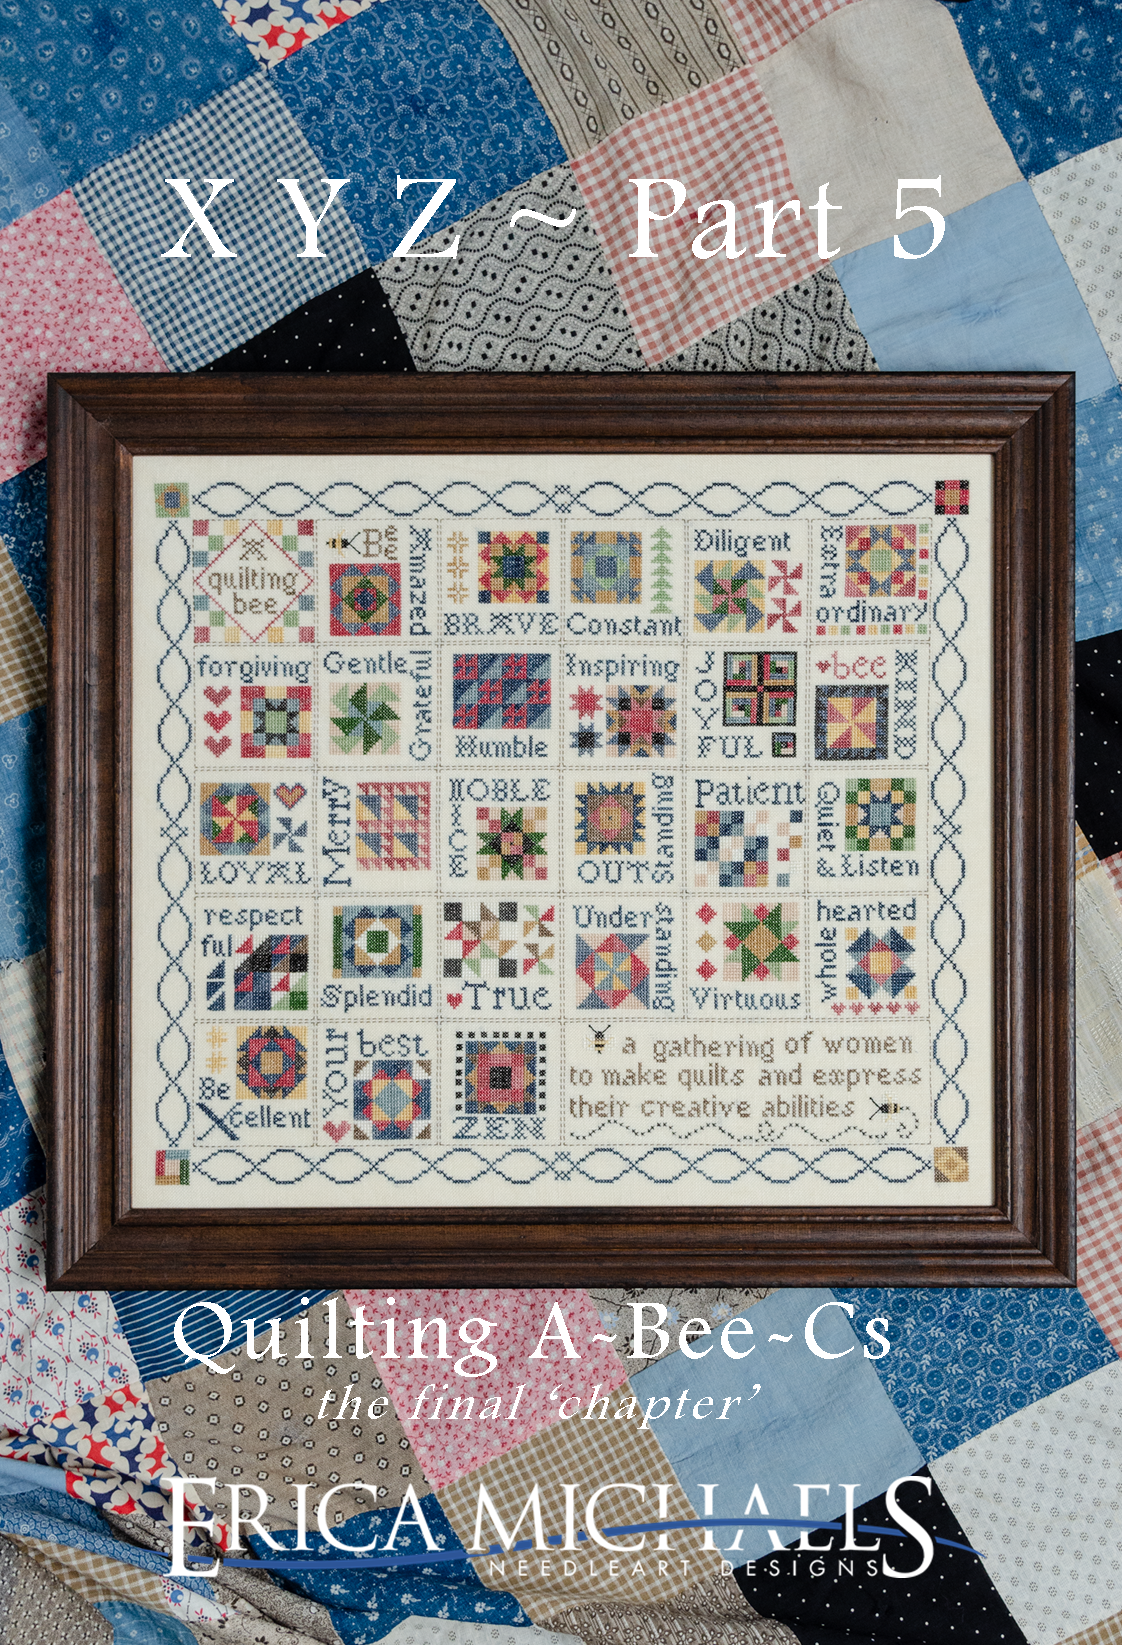 Quilting A-Bee-Cs